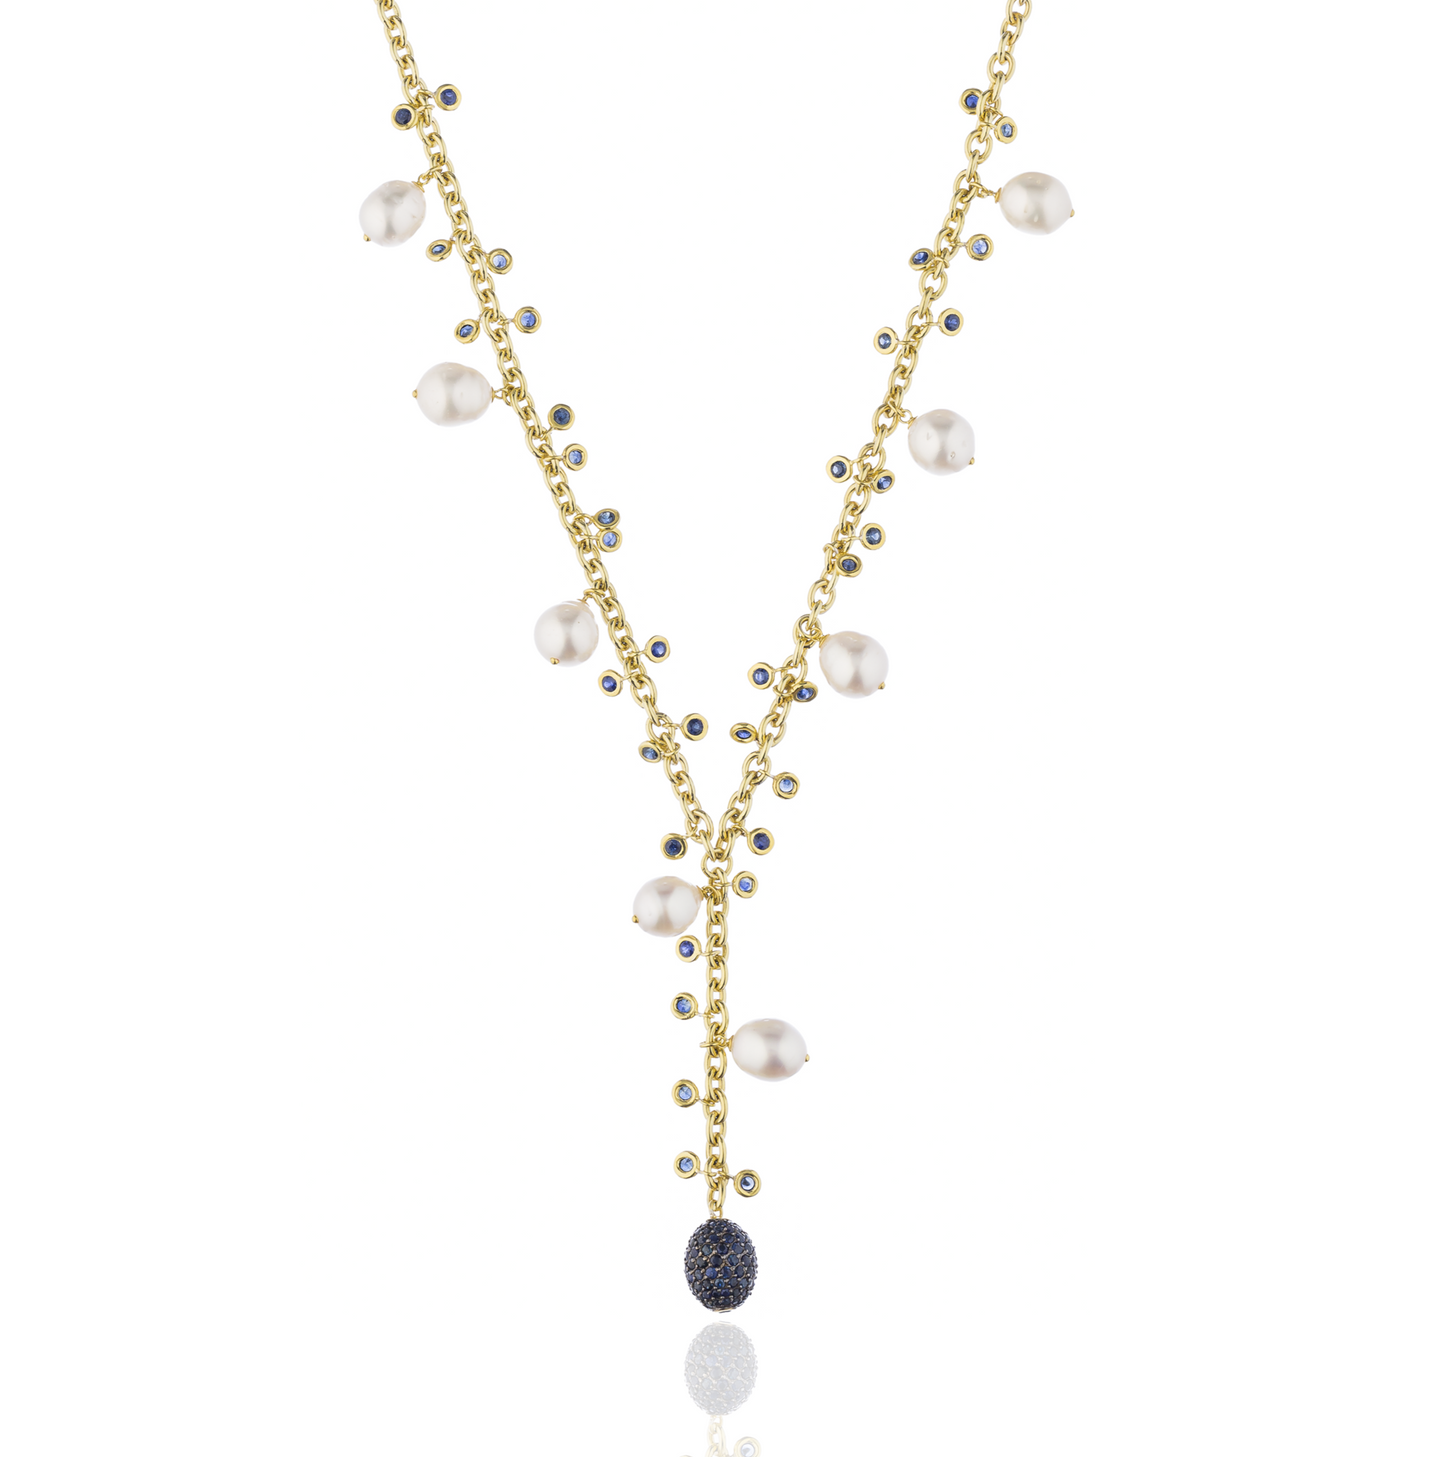 925 Silver Necklace with South Sea Pearls & Blue Sapphires